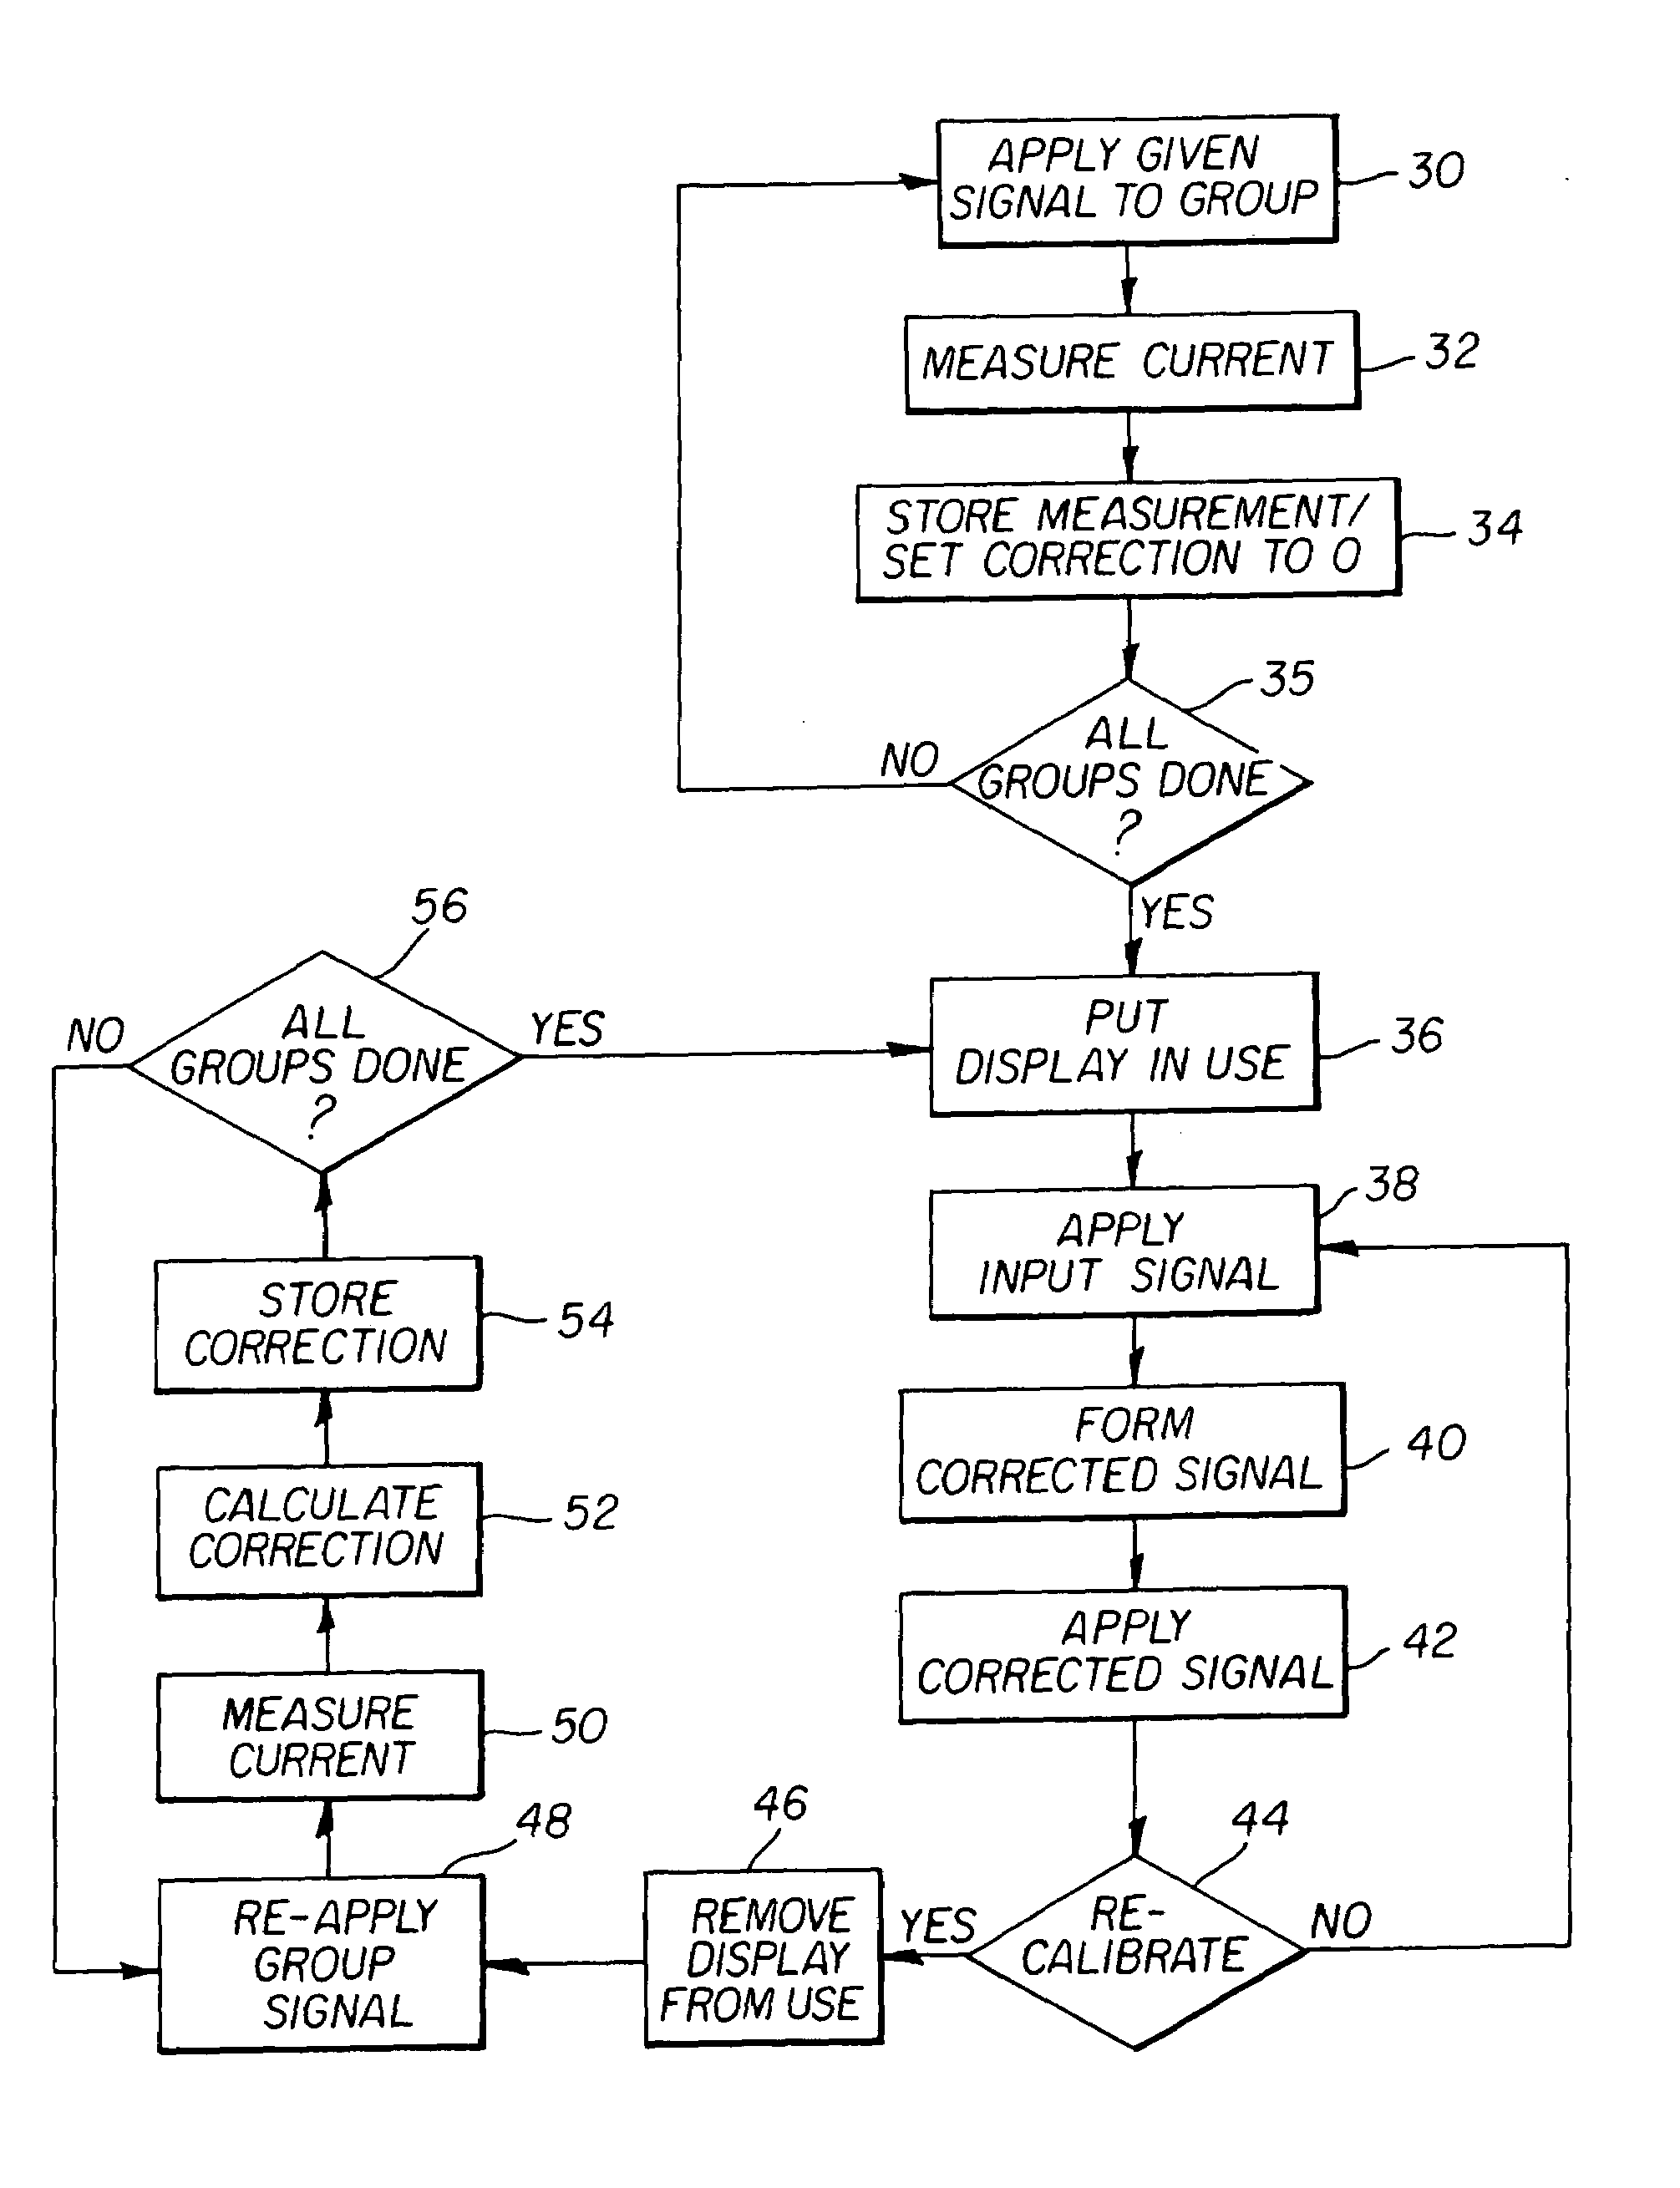 OLED display with aging compensation